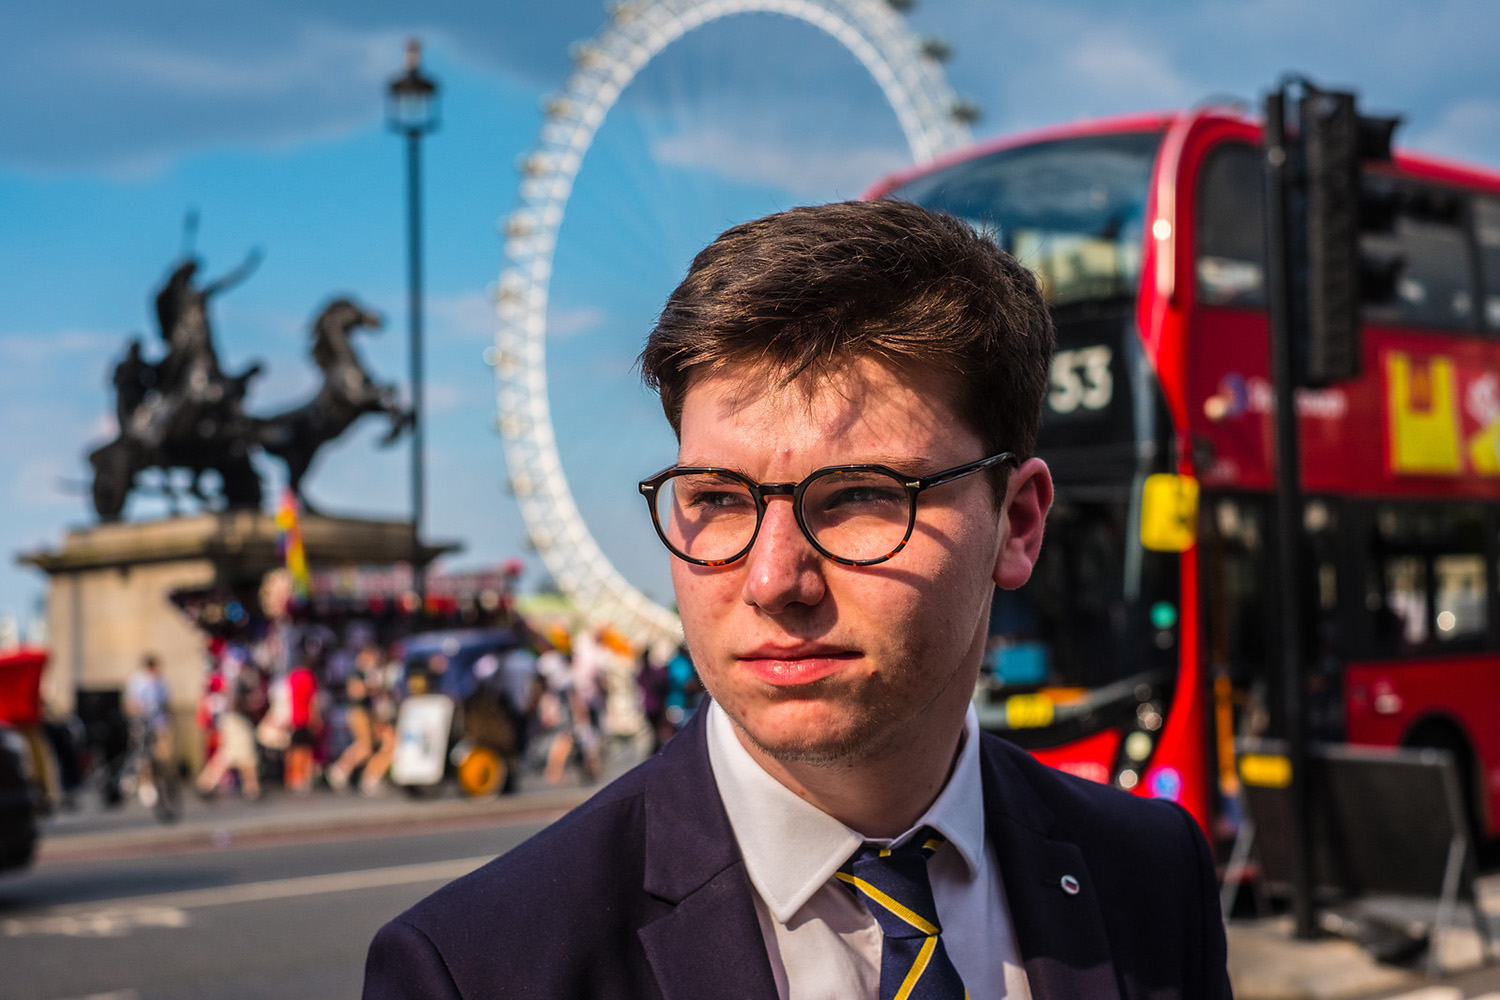 Student Thomas de Freitas in front of the London Eye during his time in London attending the Young Diplomats Forum.